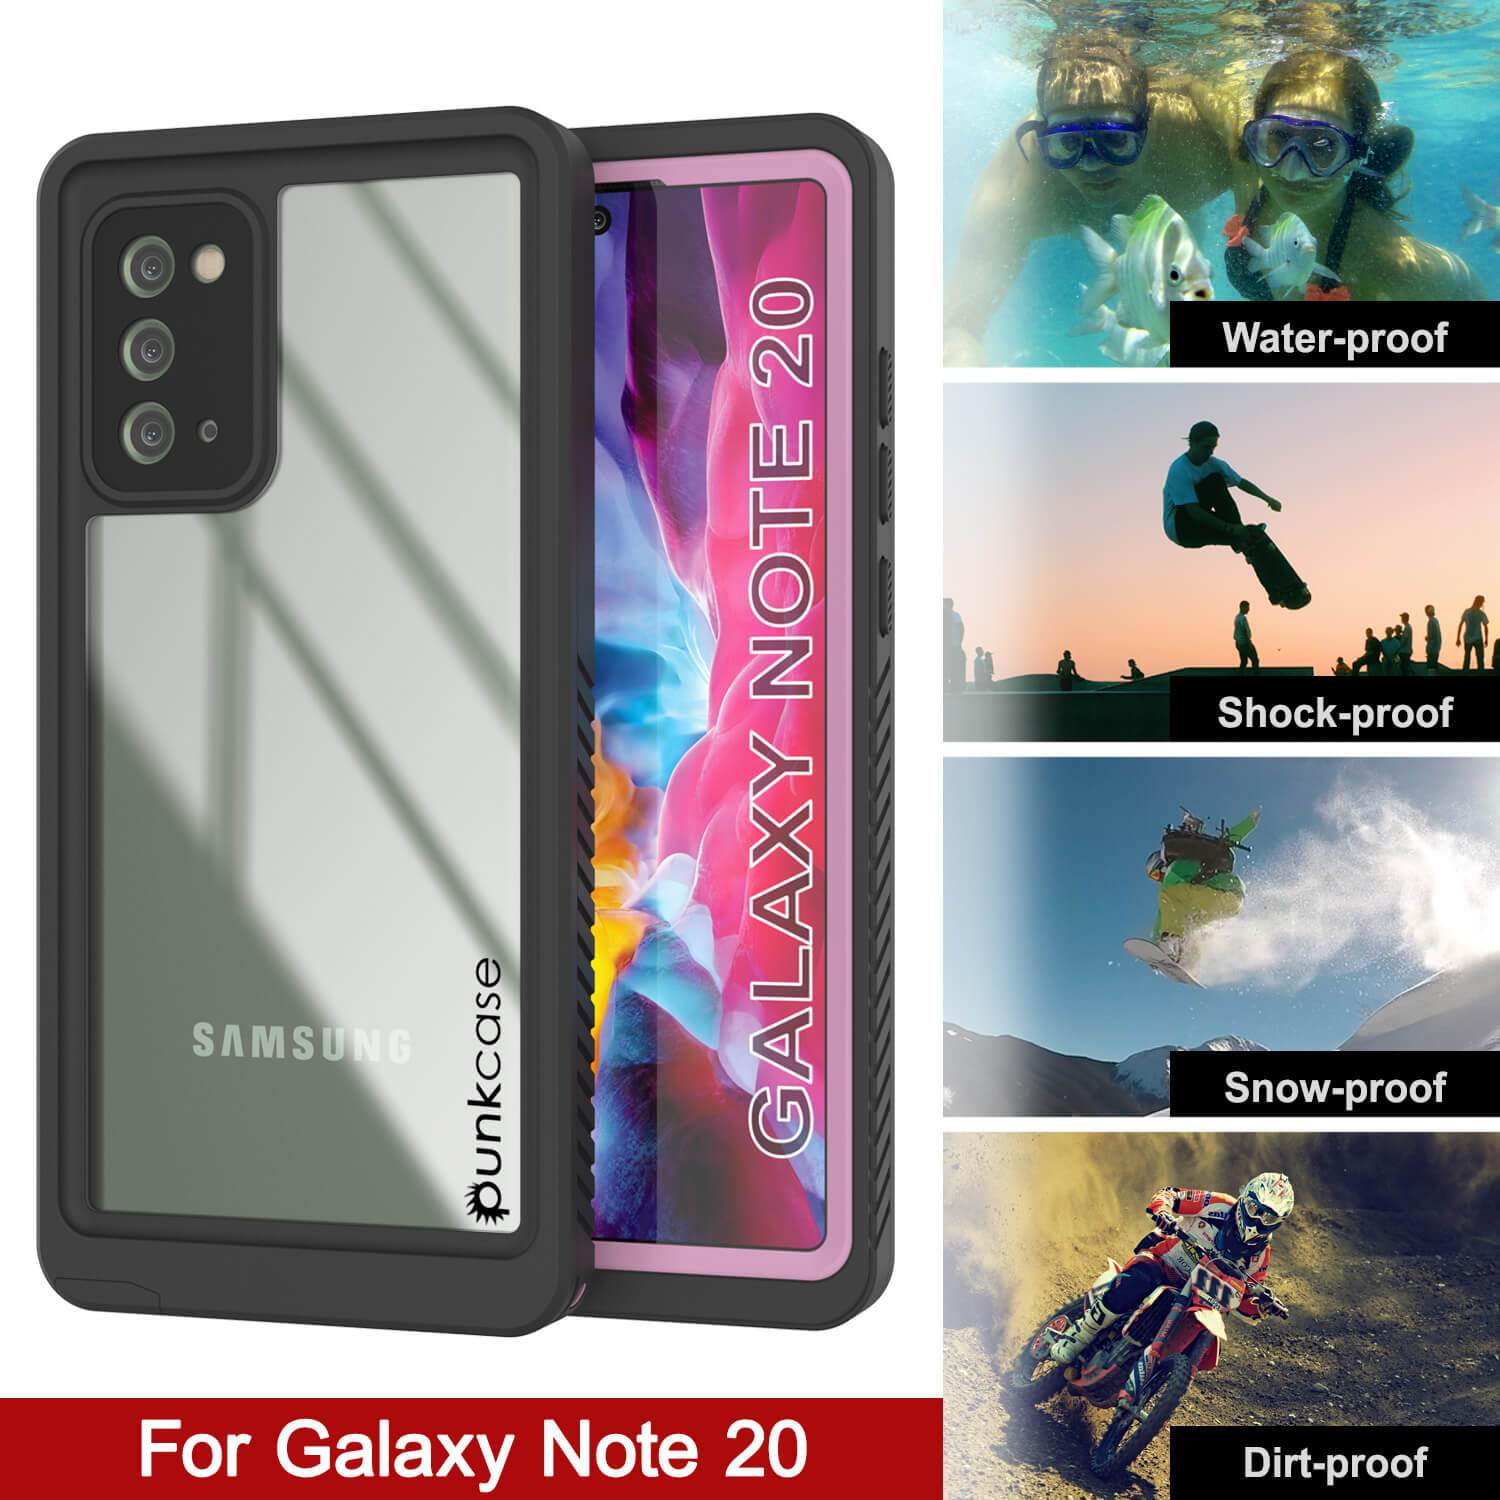 Galaxy Note 20 Case, Punkcase [Extreme Series] Armor Cover W/ Built In Screen Protector [Pink]